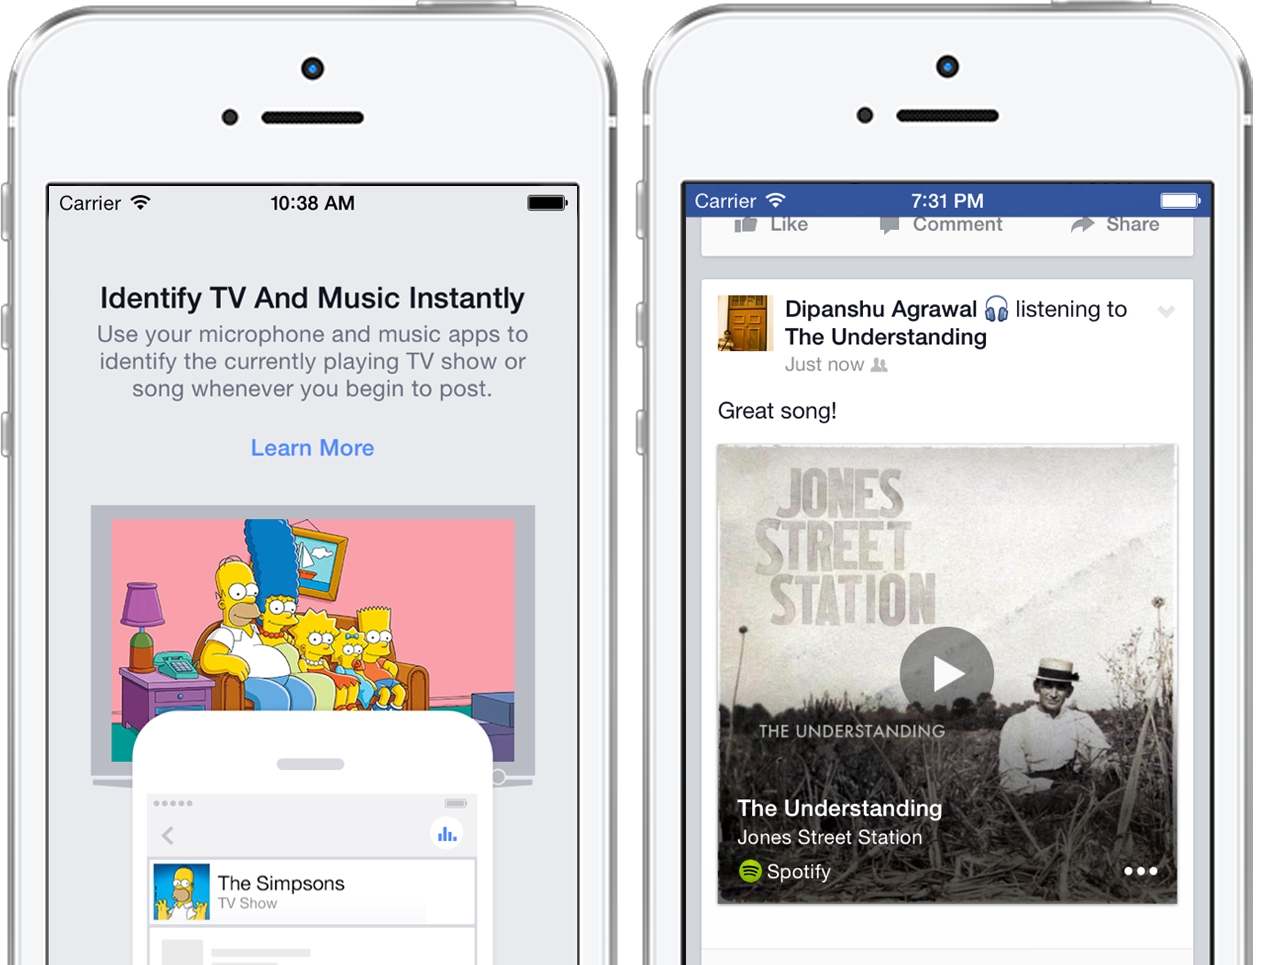 Facebook App Gains Music and TV Recognition